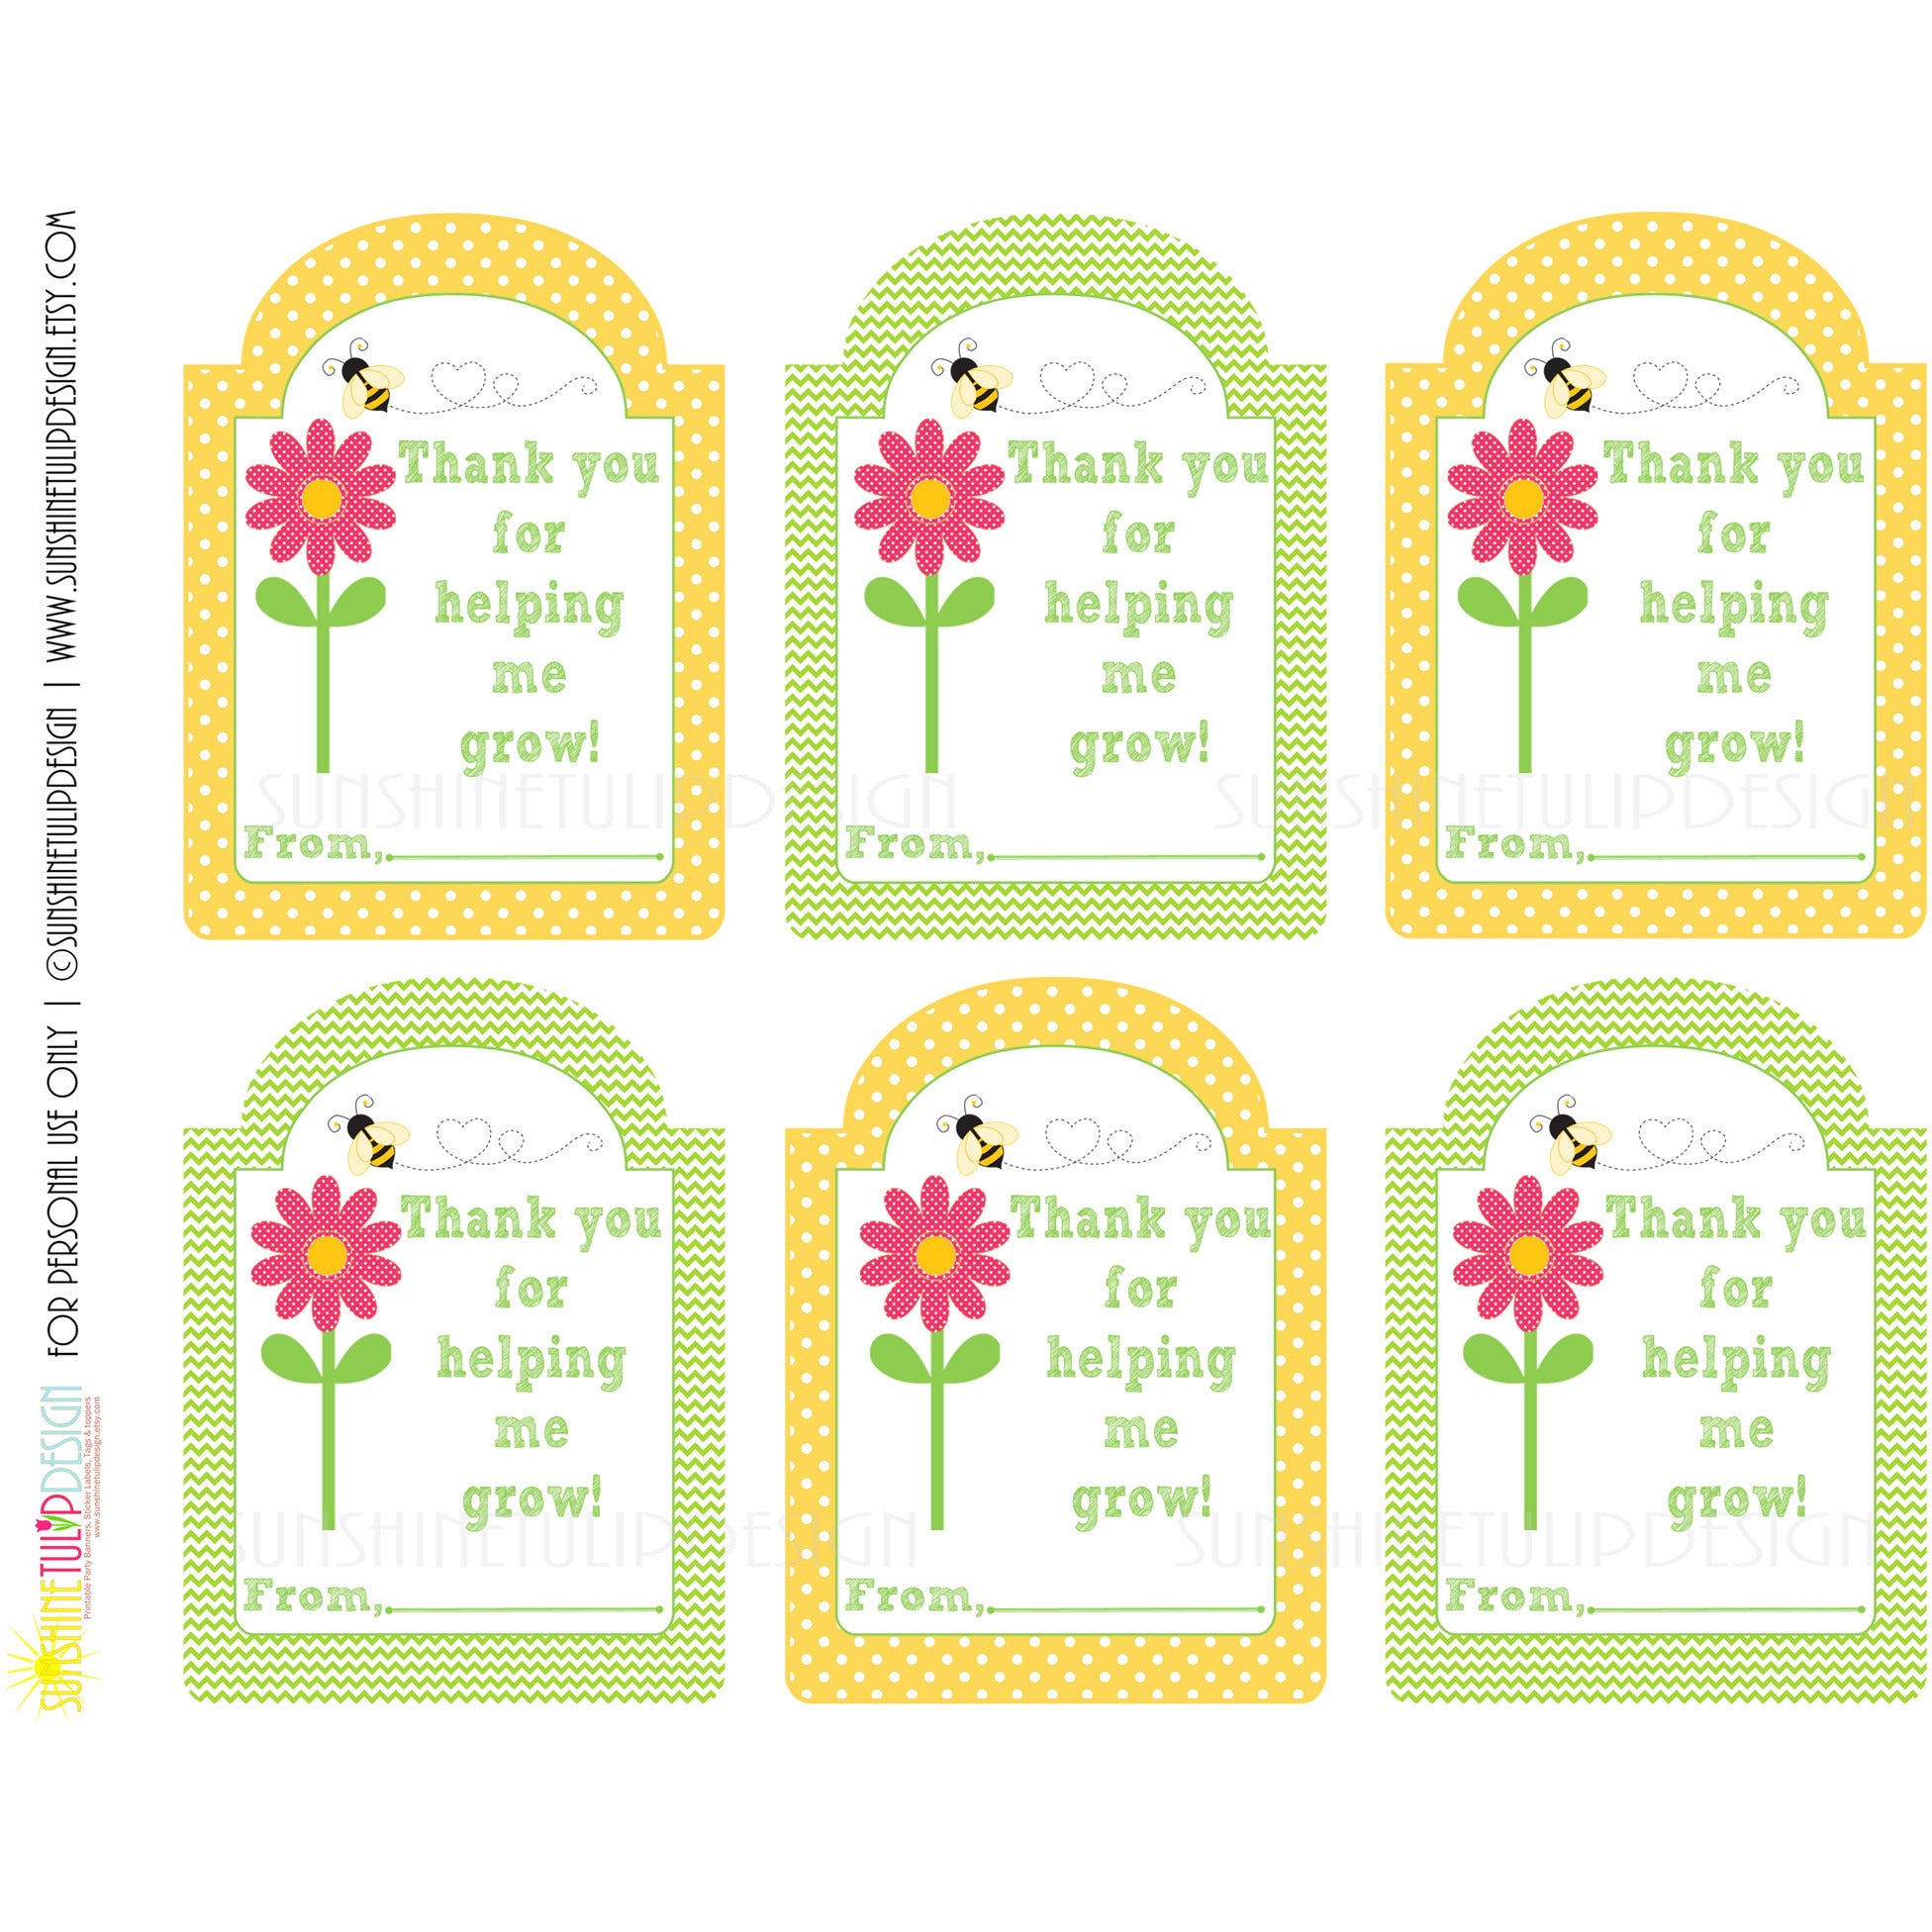 Printable Teacher Appreciation Gift Tags, Thank You for Helping Me